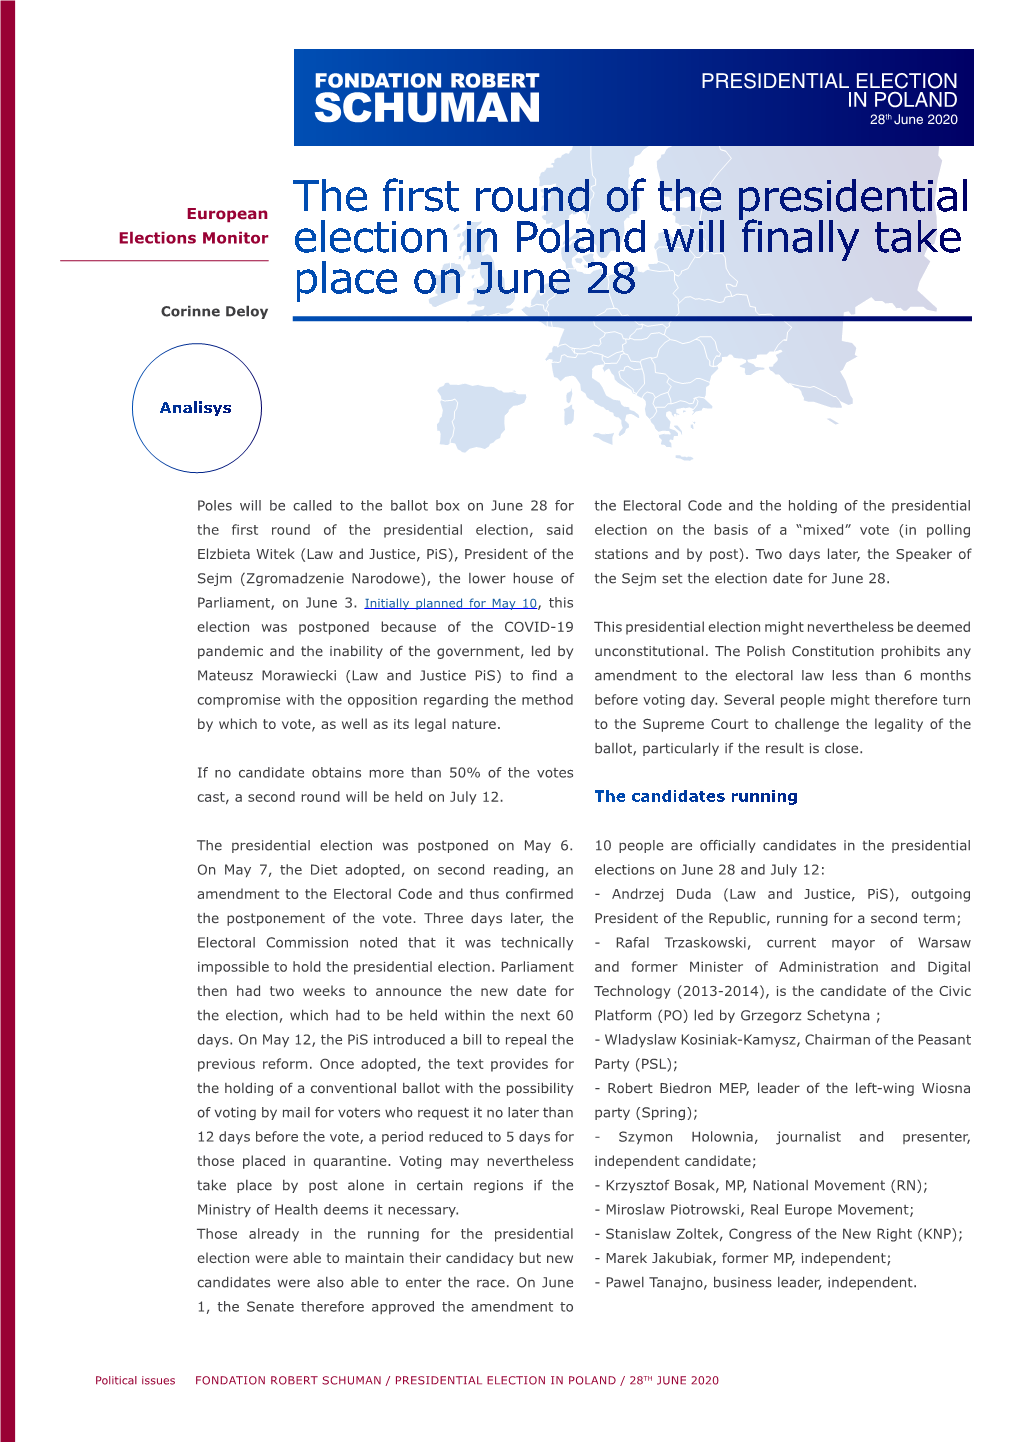 PRESIDENTIAL ELECTION in POLAND 28Th June 2020